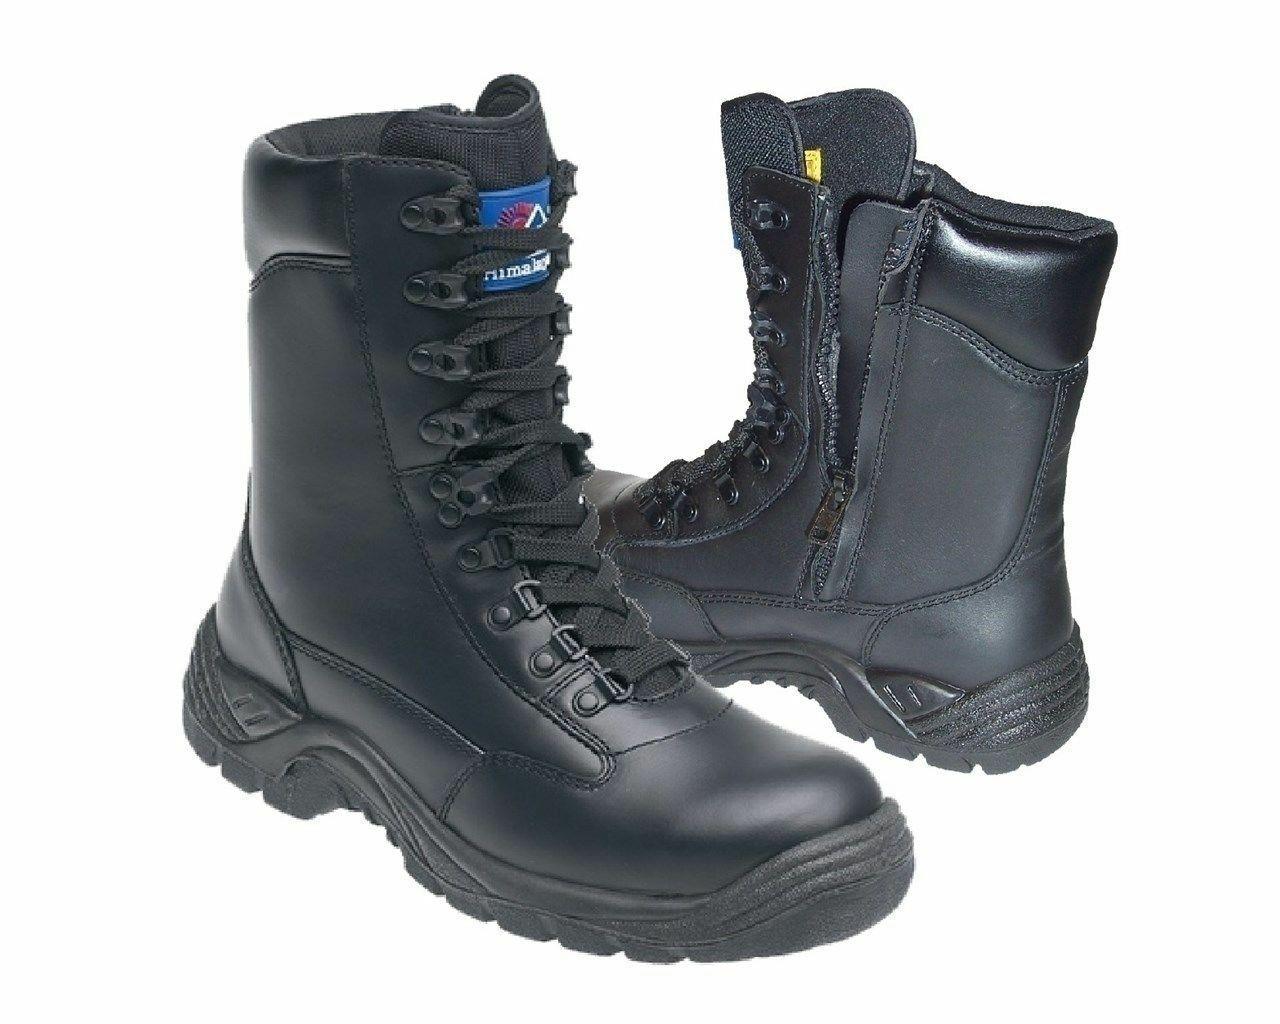 Himalayan S3 black leather steel toe/midsole side-zip safety boot #5060